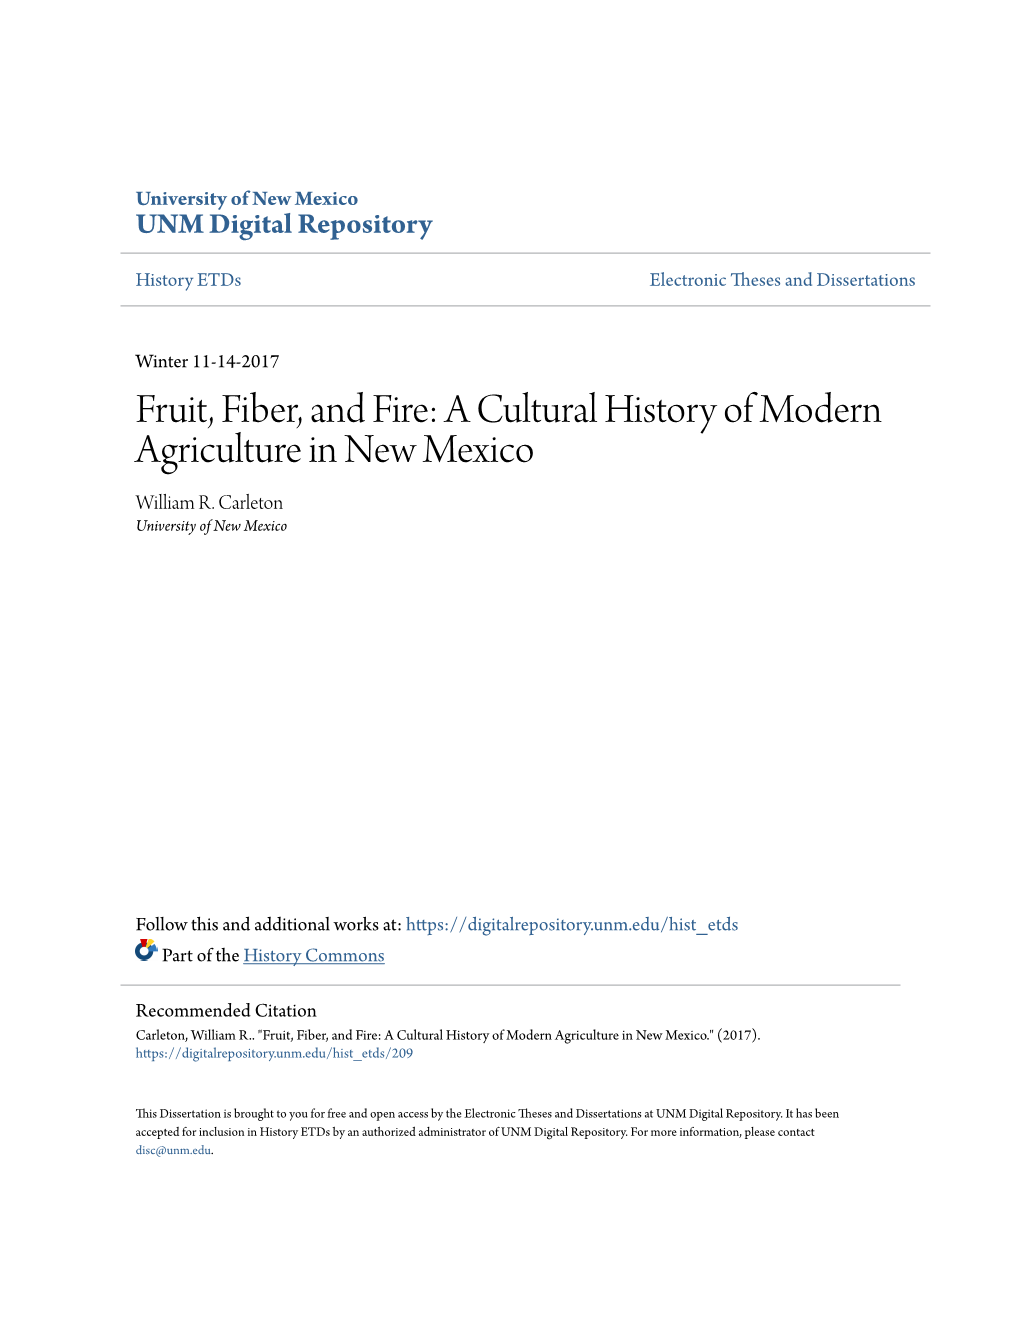 Fruit, Fiber, and Fire: a Cultural History of Modern Agriculture in New Mexico William R